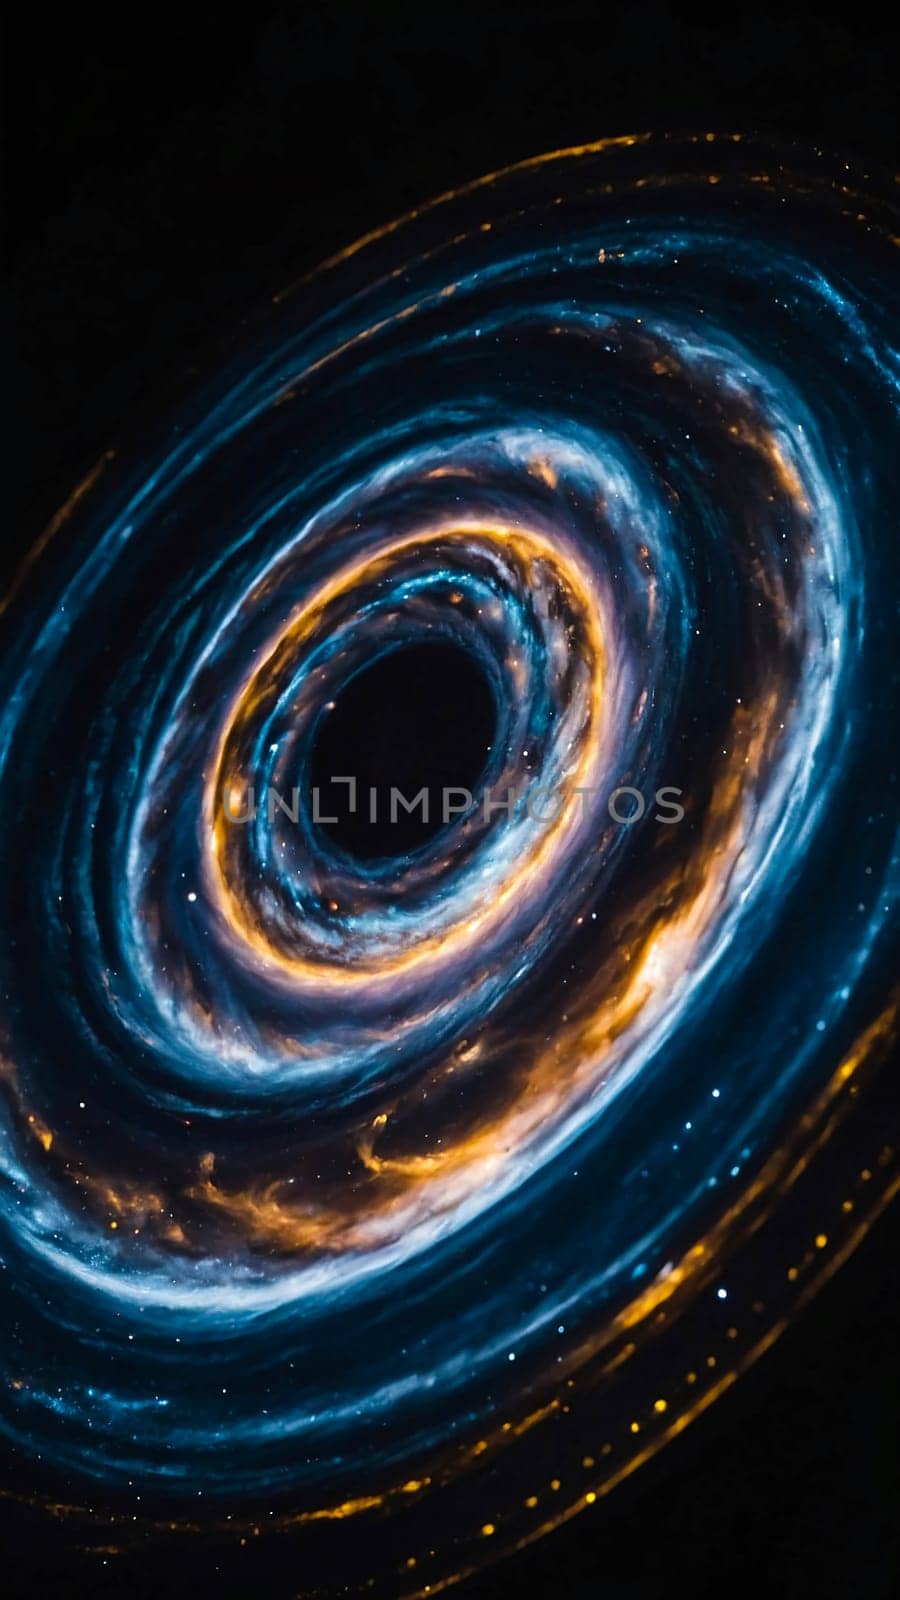 Rotating spiral galaxy. deep space exploration. star fields and nebulas in space the universe